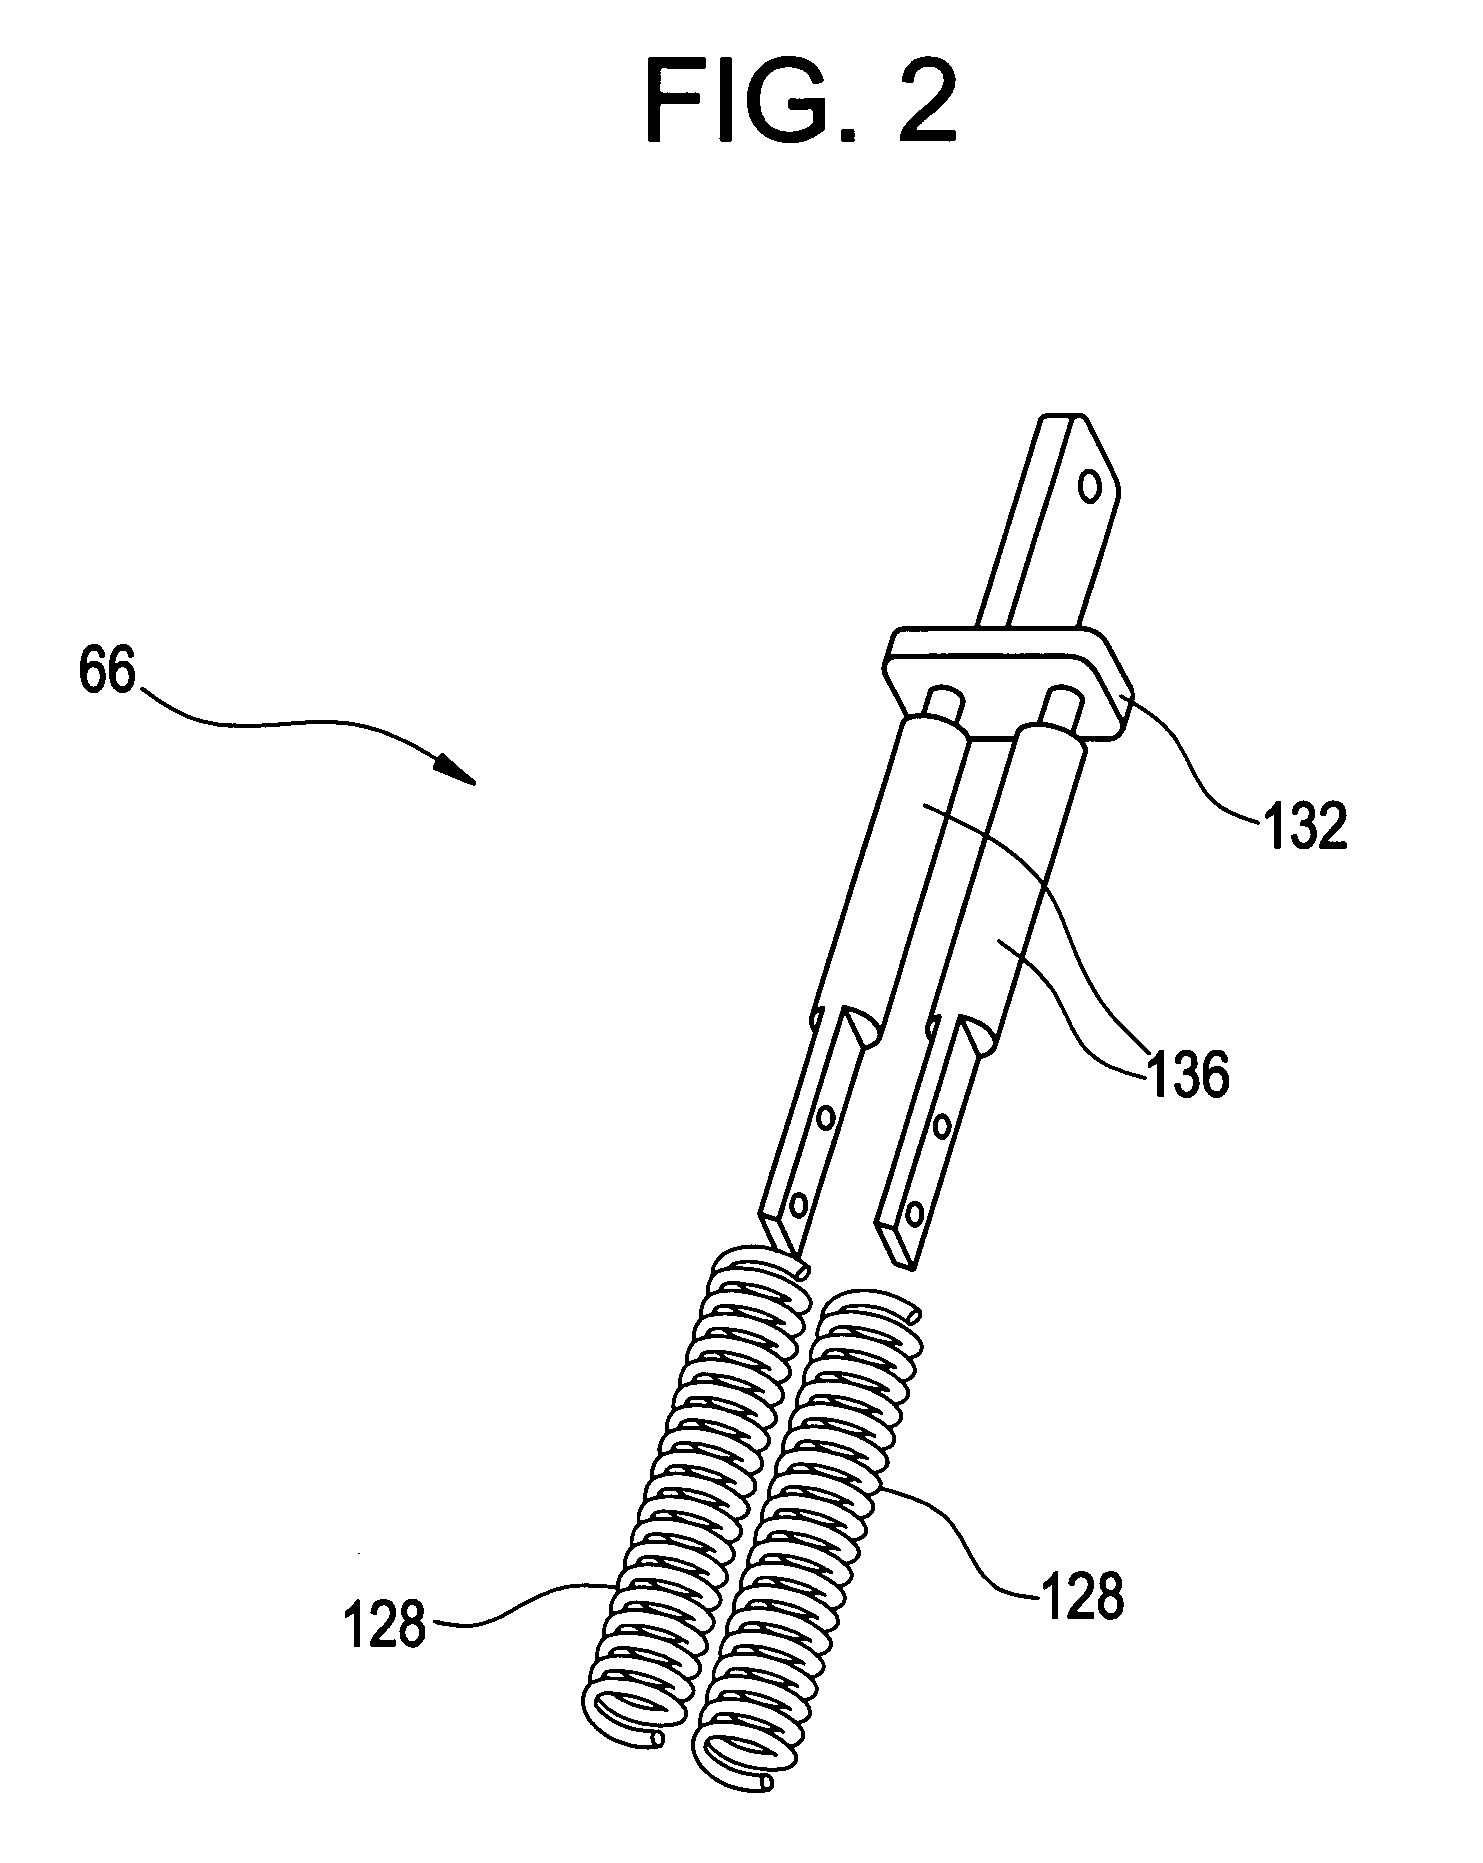 Method and apparatus for achieving three positions